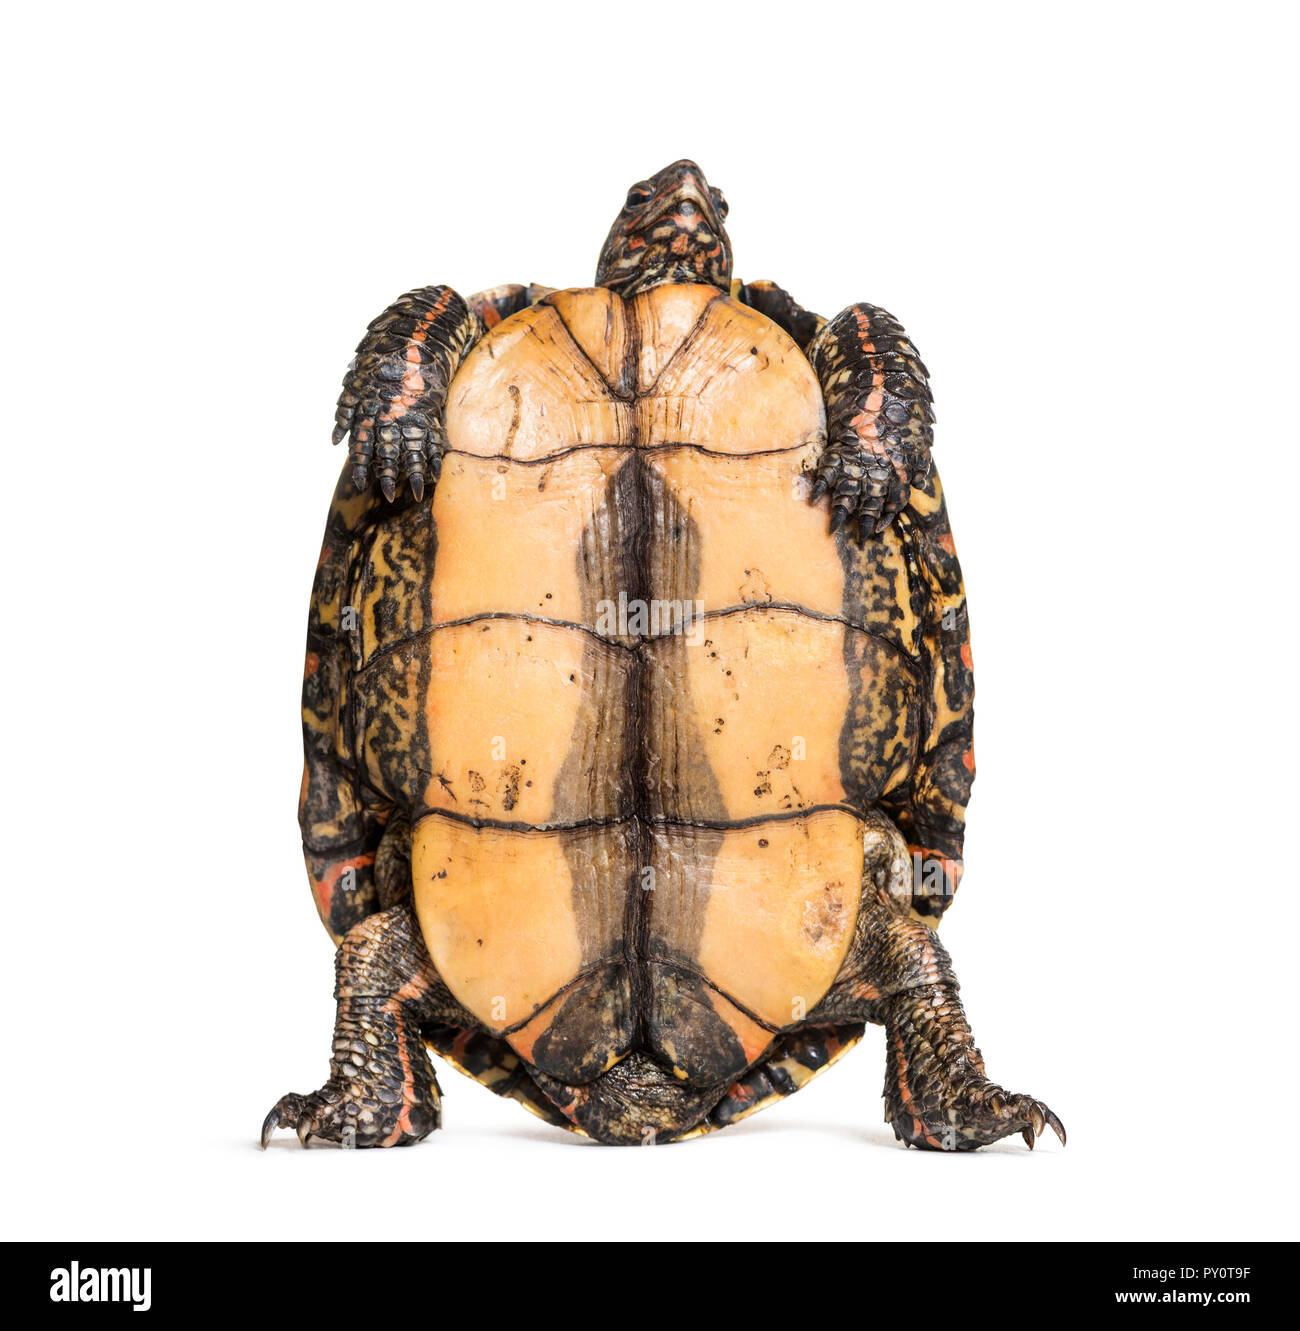 Turtle plastron Cut Out Stock Images & Pictures - Alamy